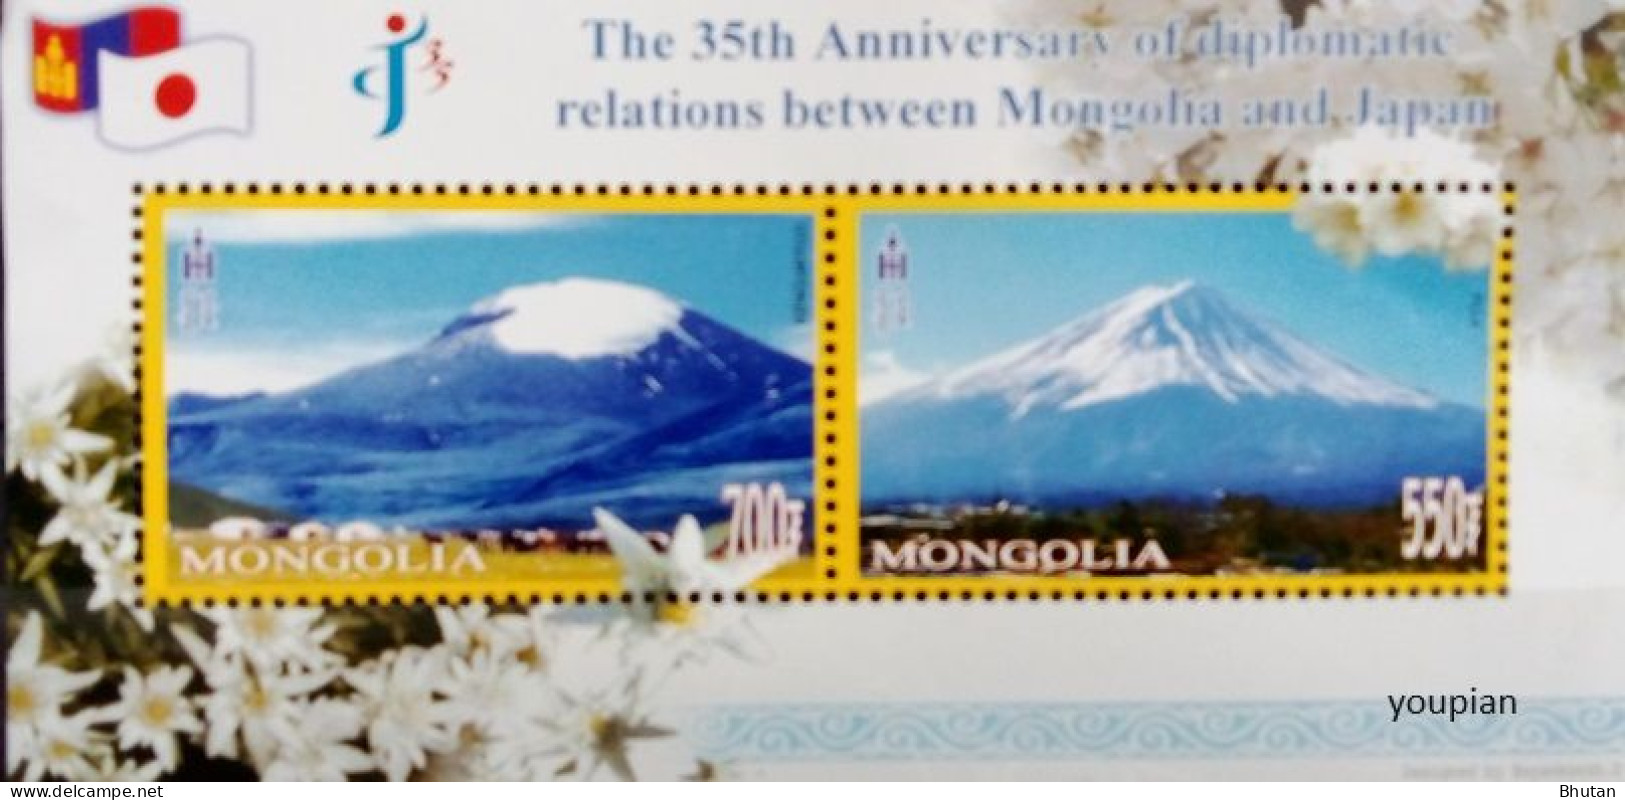 Mongolia 2007, 35 Years Of Diplomatic Relations With Japan - Mountains, MNH S/S - Mongolia